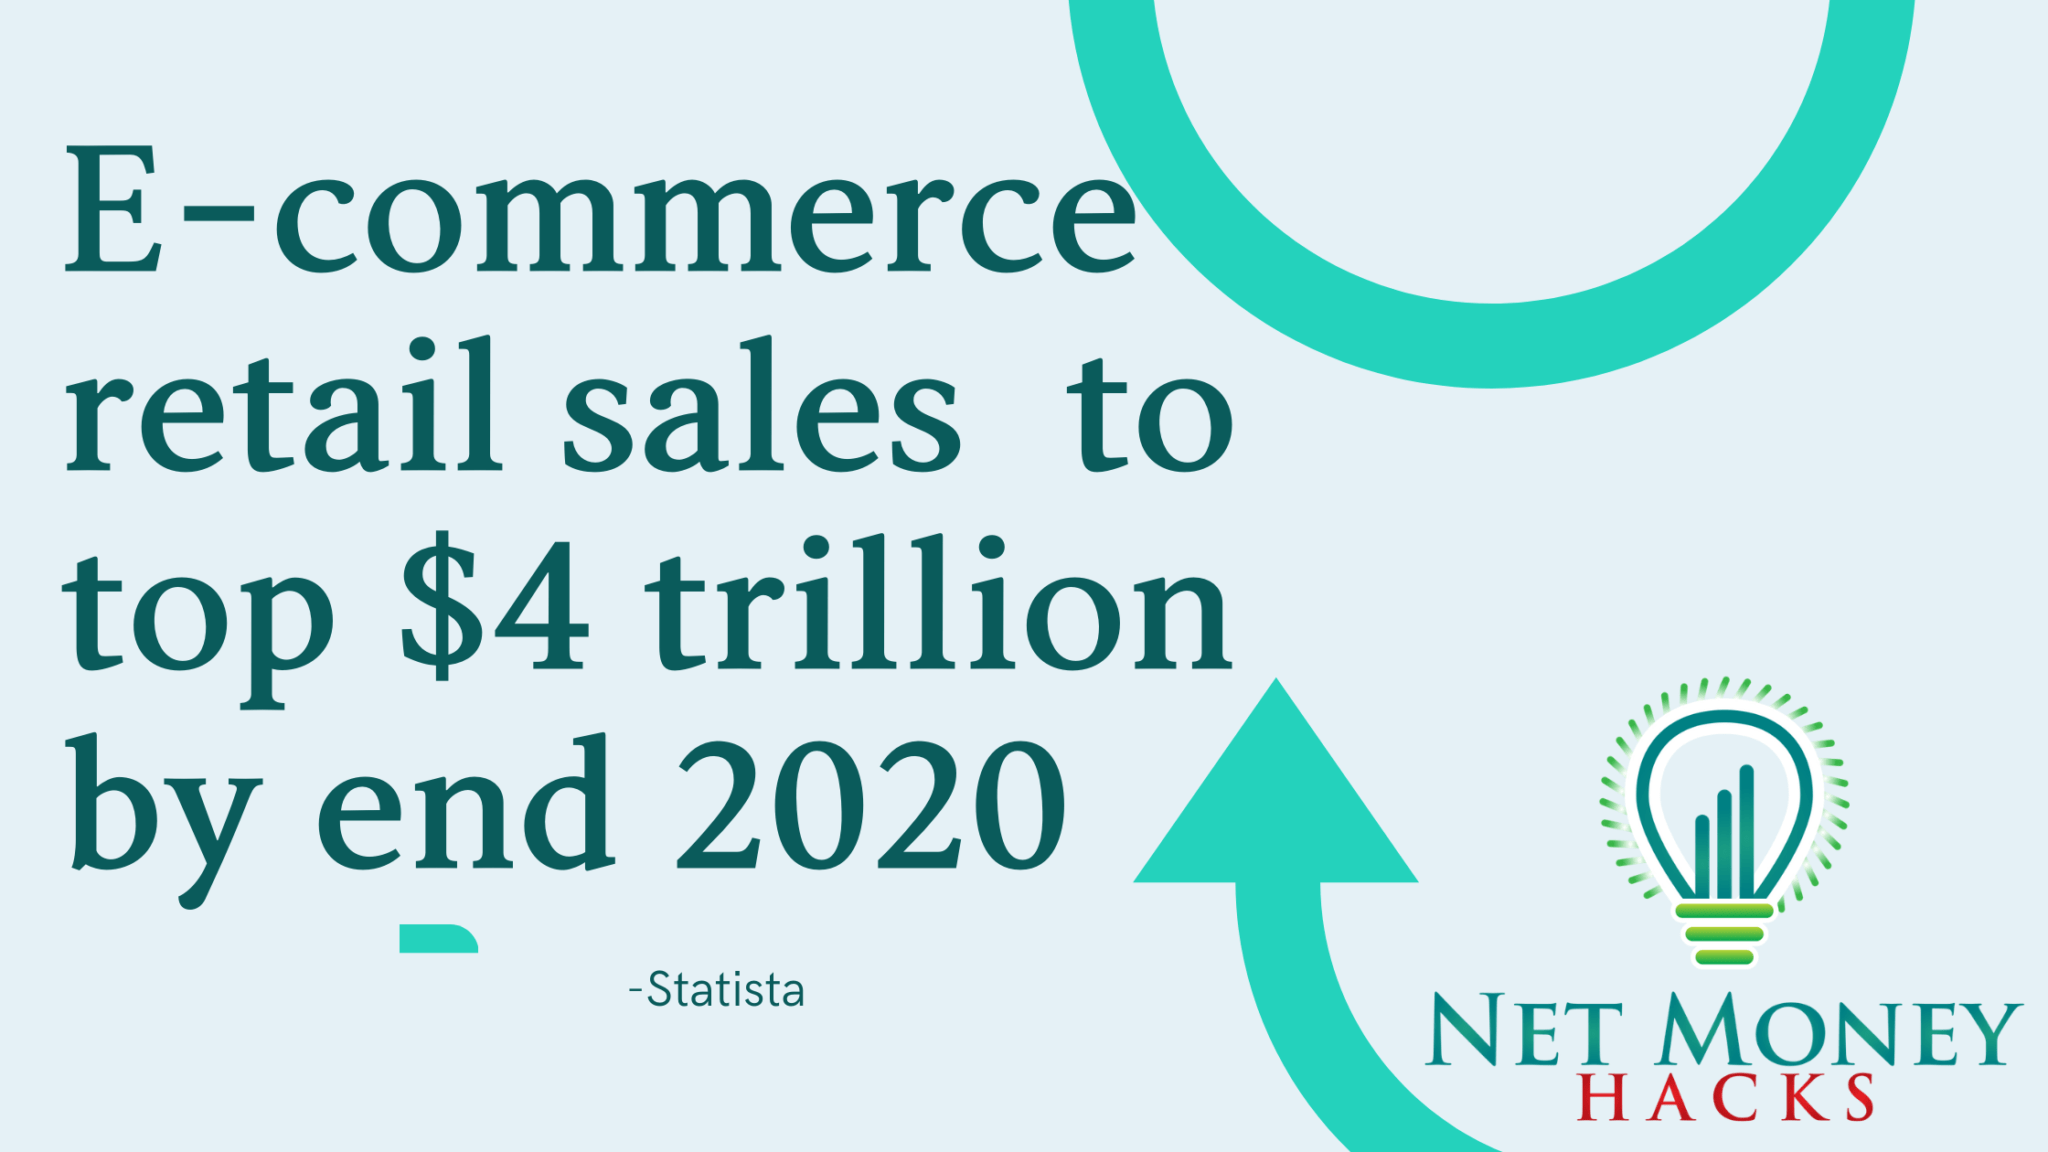 Banner depicting projected eCommerce retail sales figure expected to hit $4 Trillion dollars by end of 2020statistics